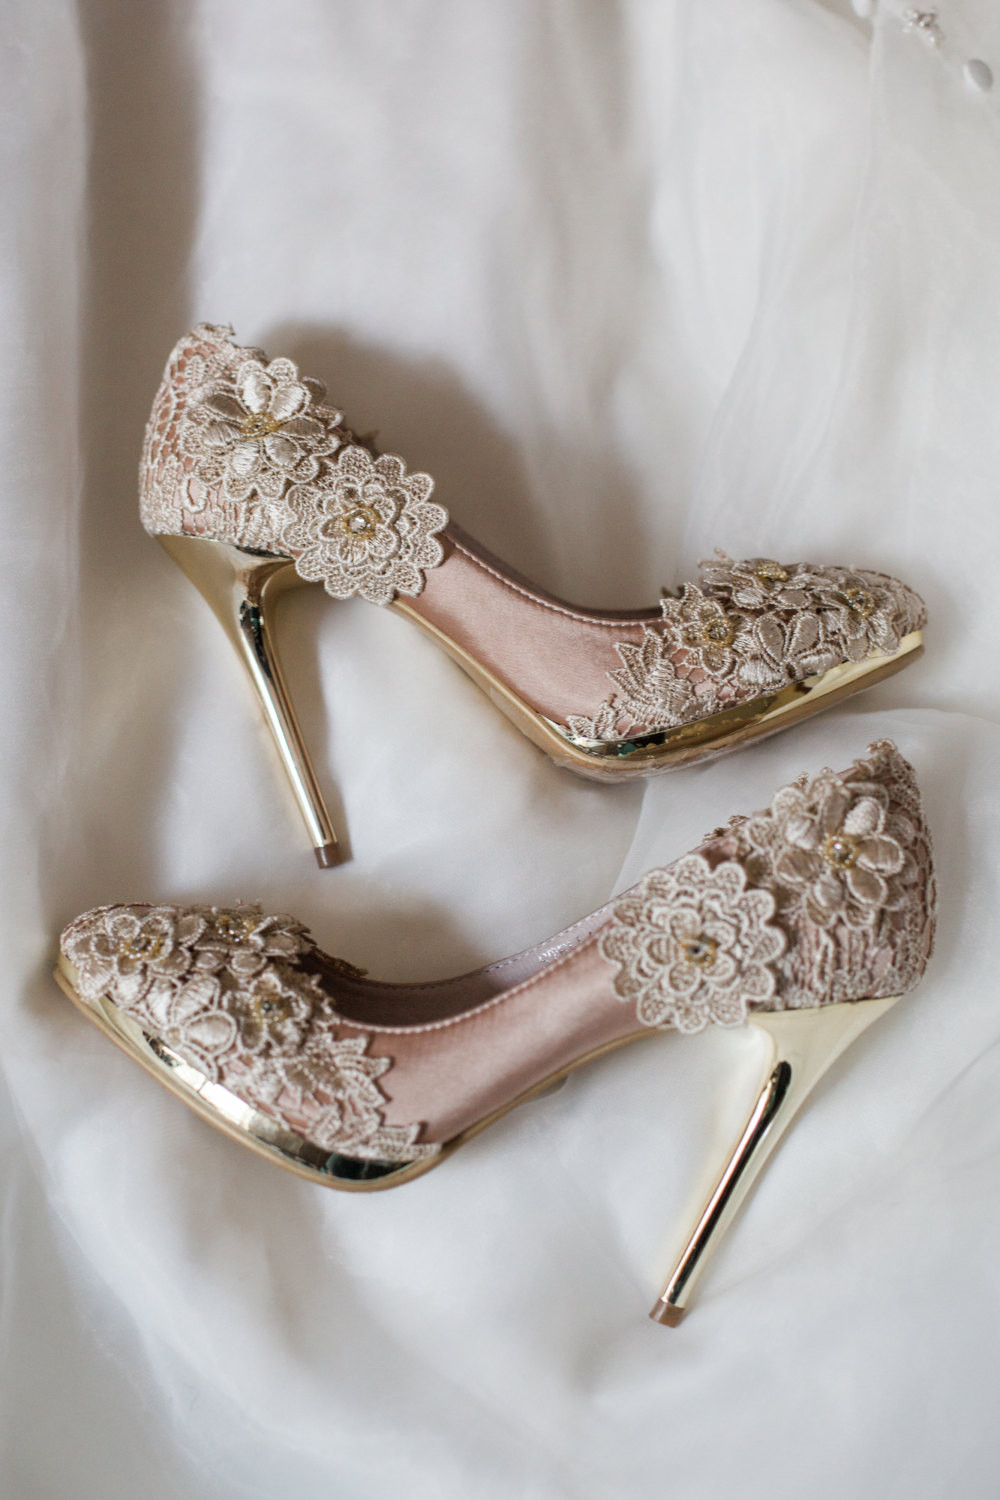 Wedding Shoes Sale
 SALE Vintage Flower Lace Wedding Shoes with Champagne Gold